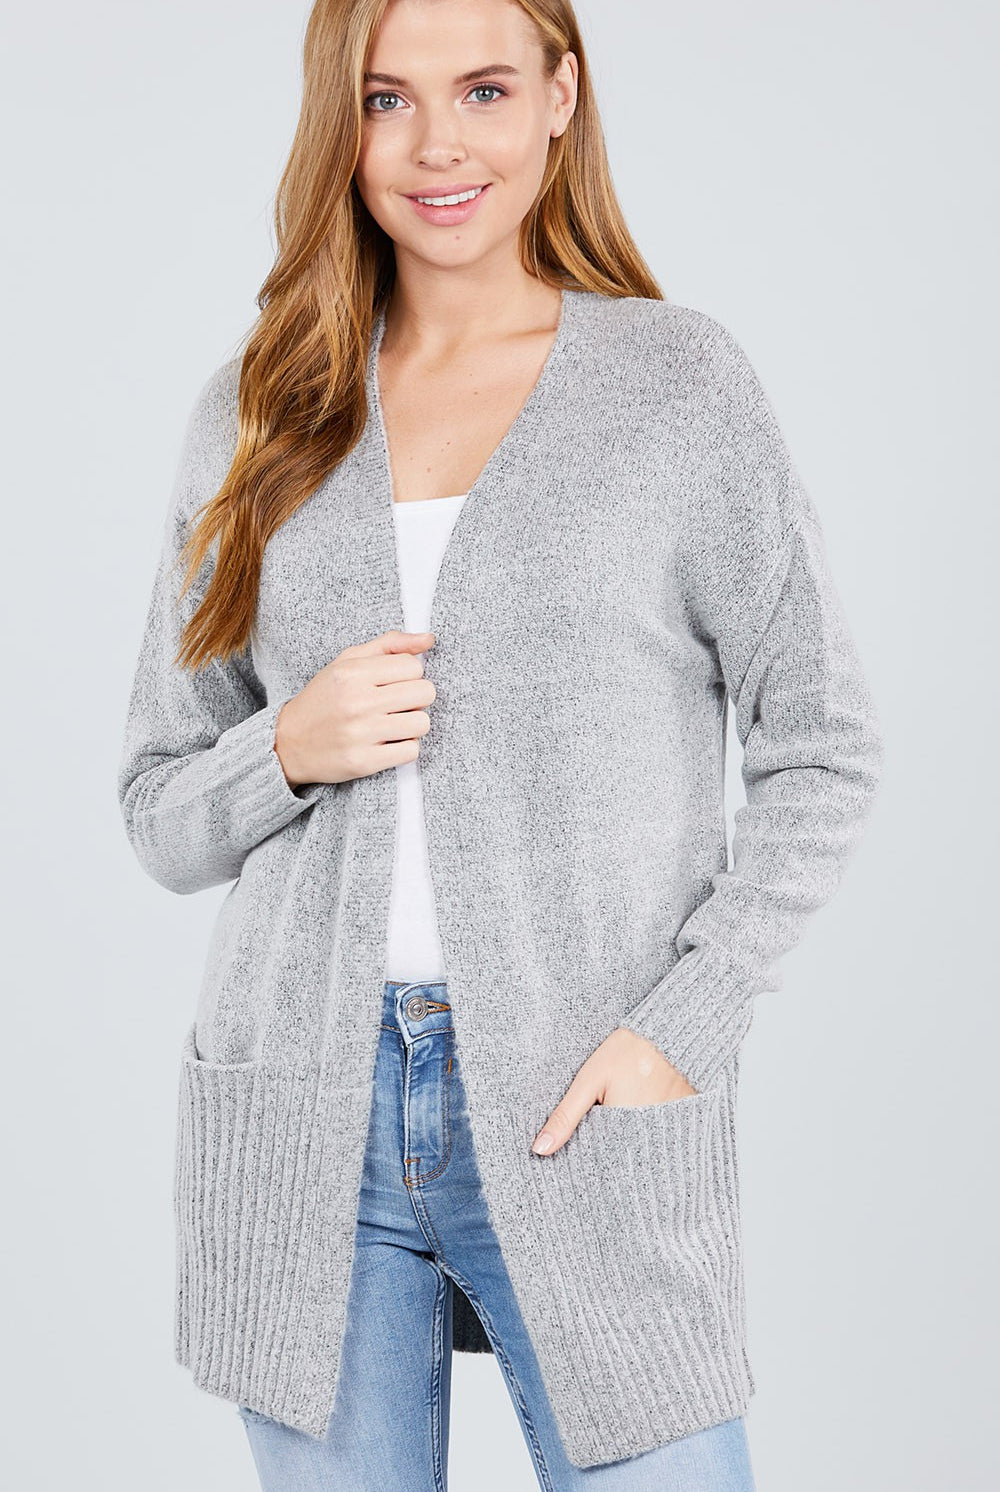 One More Day Sweater Cardigan-Cardigans-Krush Kandy, Women's Online Fashion Boutique Located in Phoenix, Arizona (Scottsdale Area)